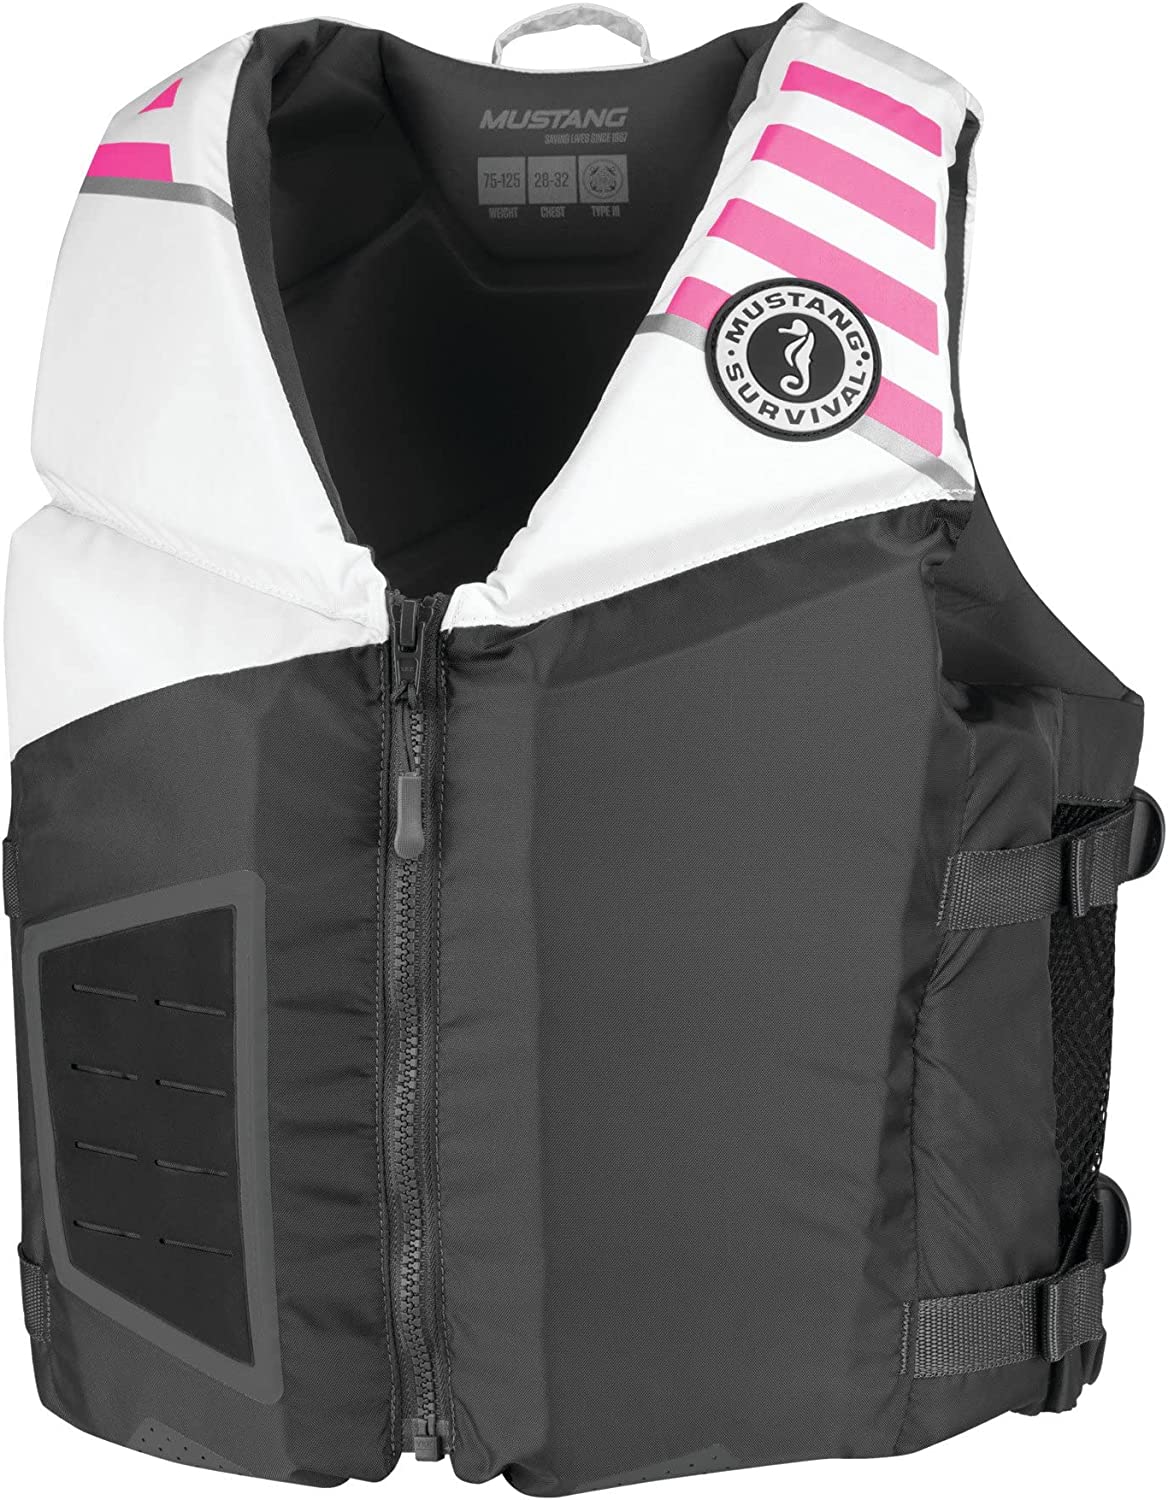 Mustang Survival – Rev Young Adult Foam Vest – Gray, White, Pink, Young Adult (88 lb. – 110 lb.)